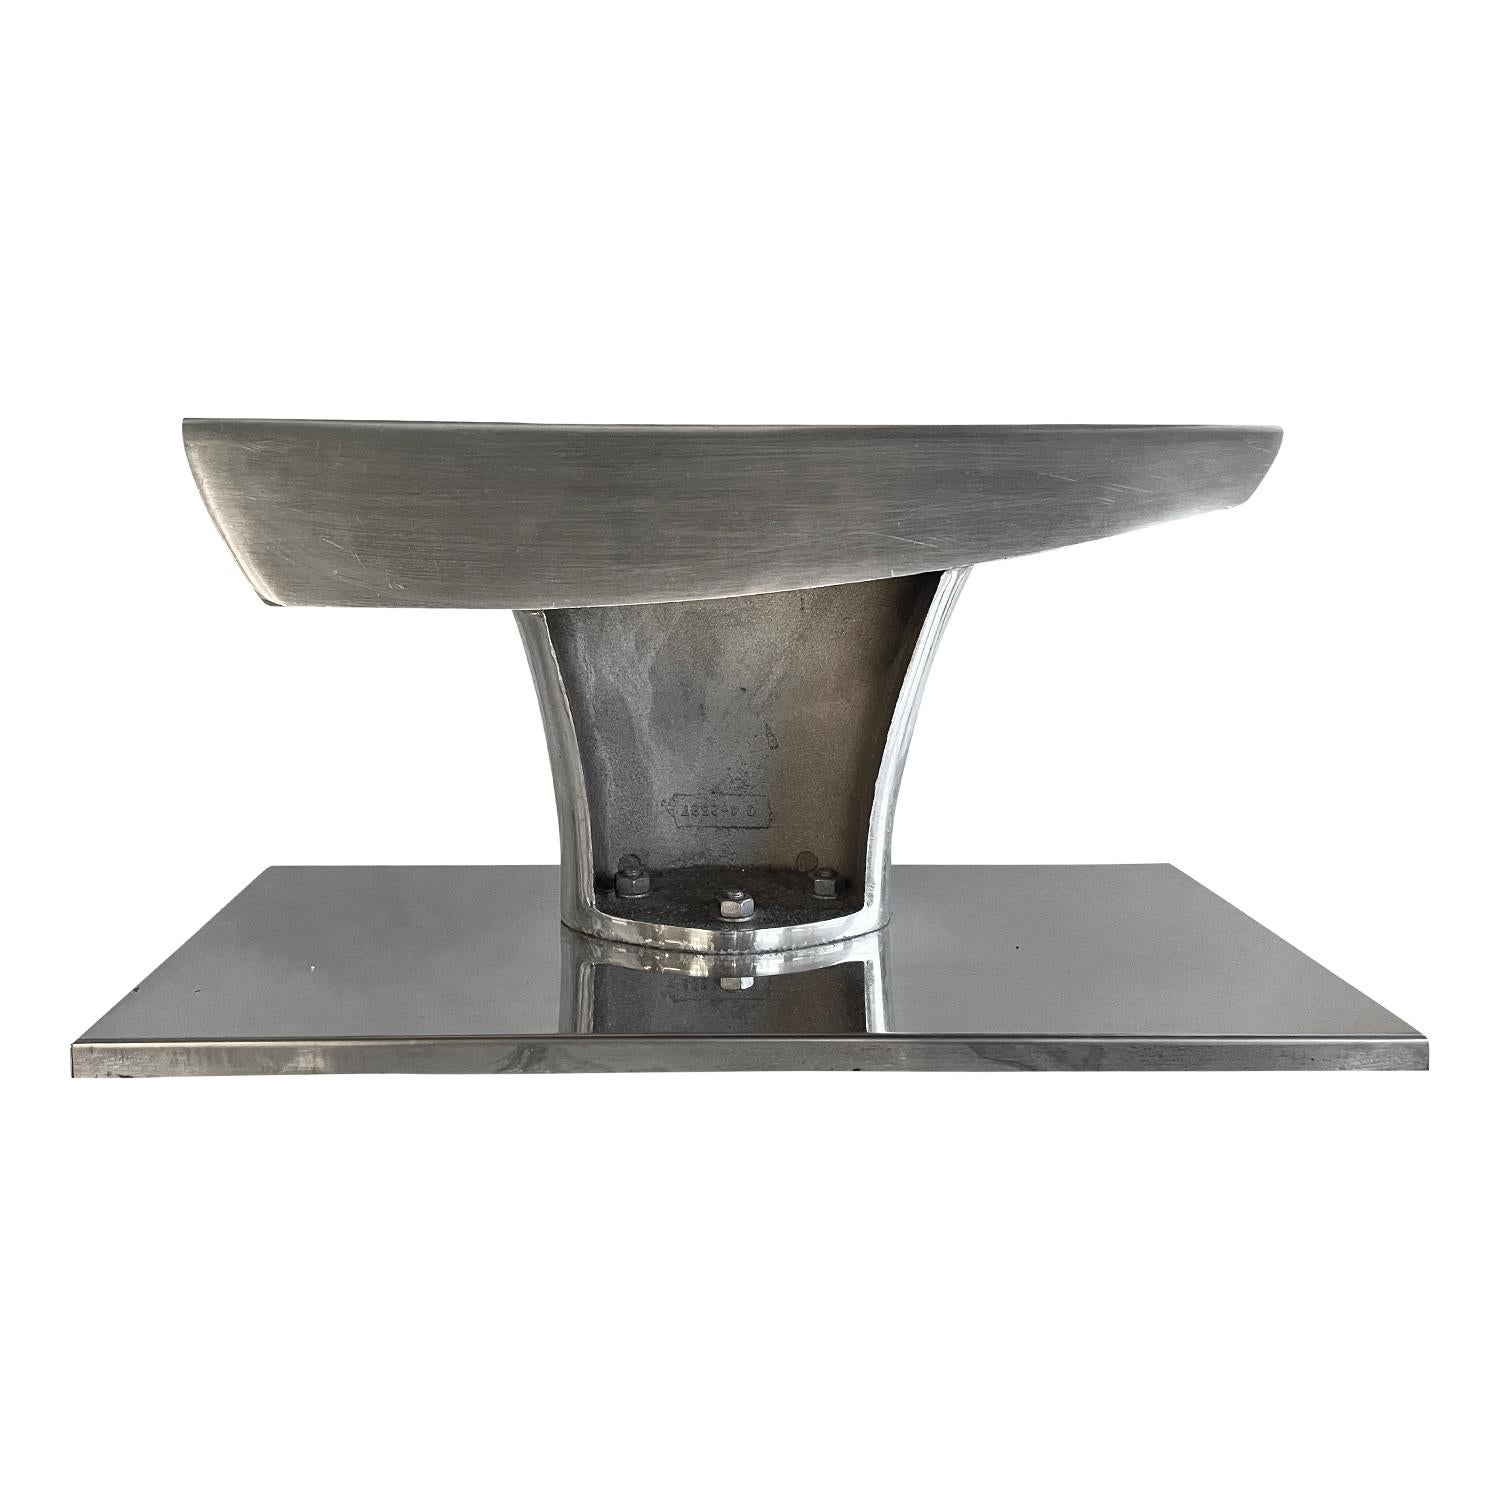 A silver, vintage Mid-Century Modern Italian object d'Art made of hand crafted aluminum on a rectangular base bollard, in good condition. Wear consistent with age and use, circa 1960 Milan, Northern Italy.